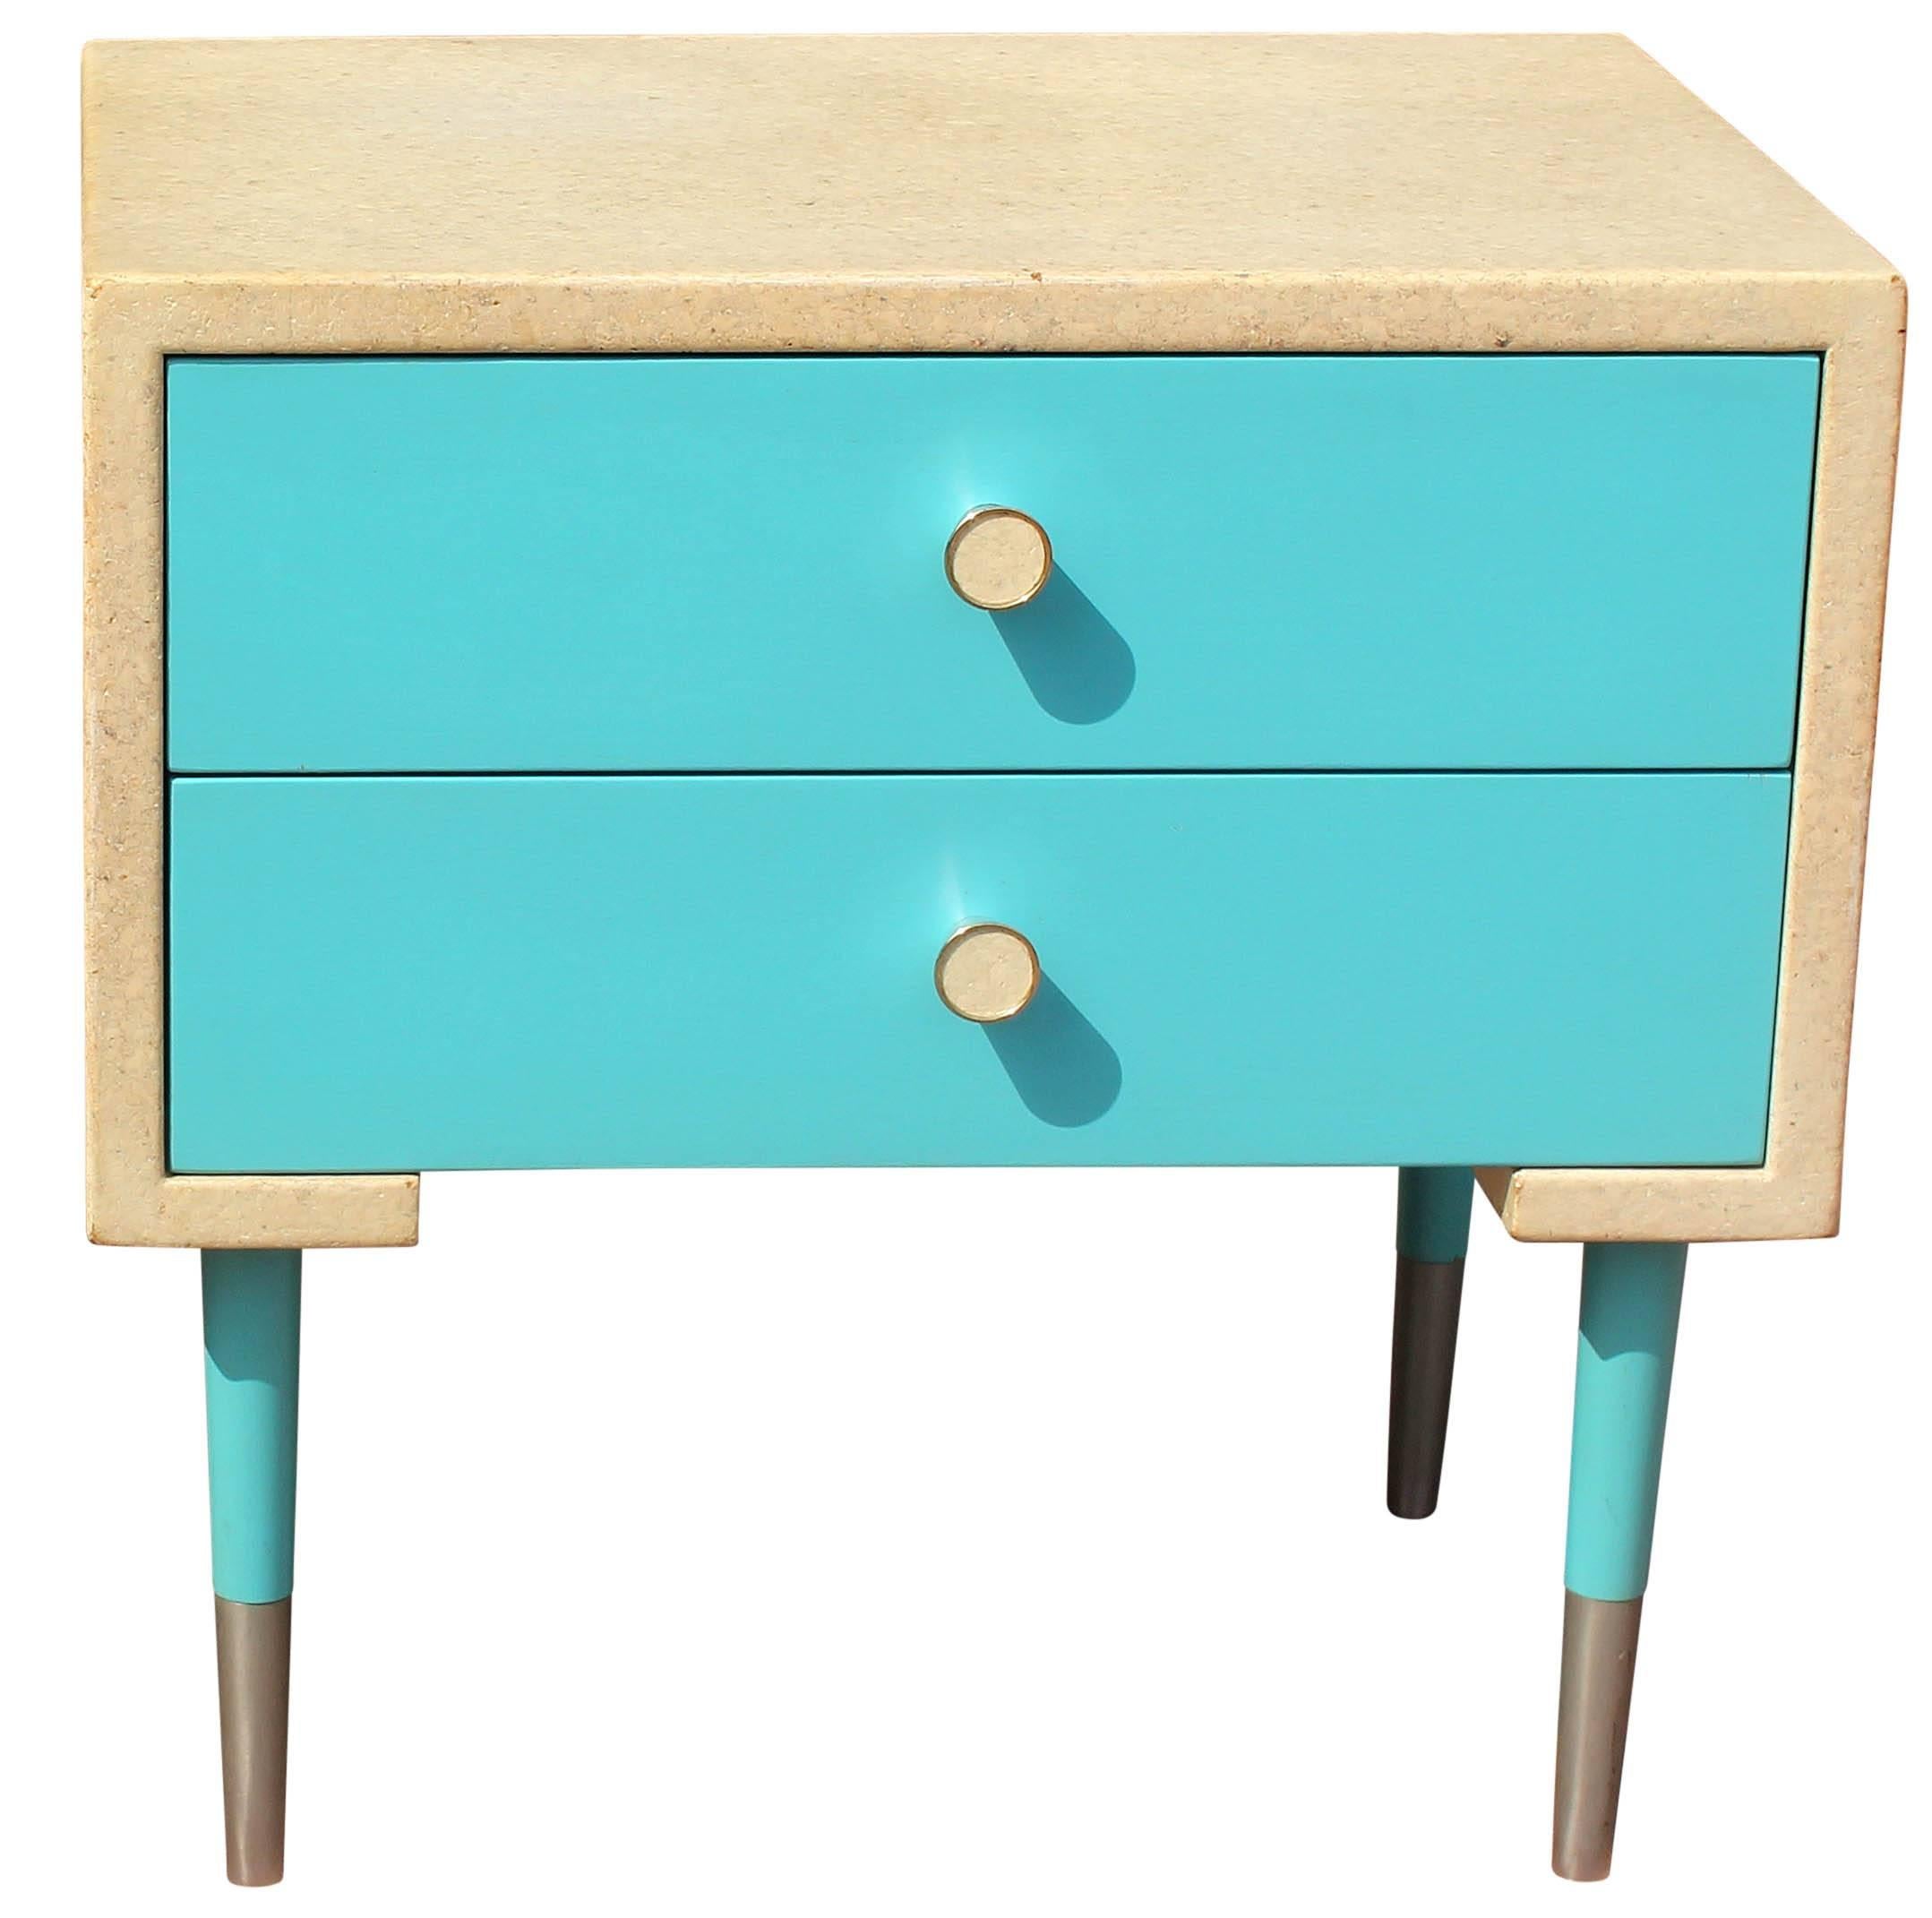 Pair of customized two-drawer end tables or nightstands designed by Paul Frankl for Johnson Furniture Co. lacquered cork tops and sides. Drawers and legs lacquered in robin egg blue. Aluminum pulls and feet. Original owners purchased these in 1954.